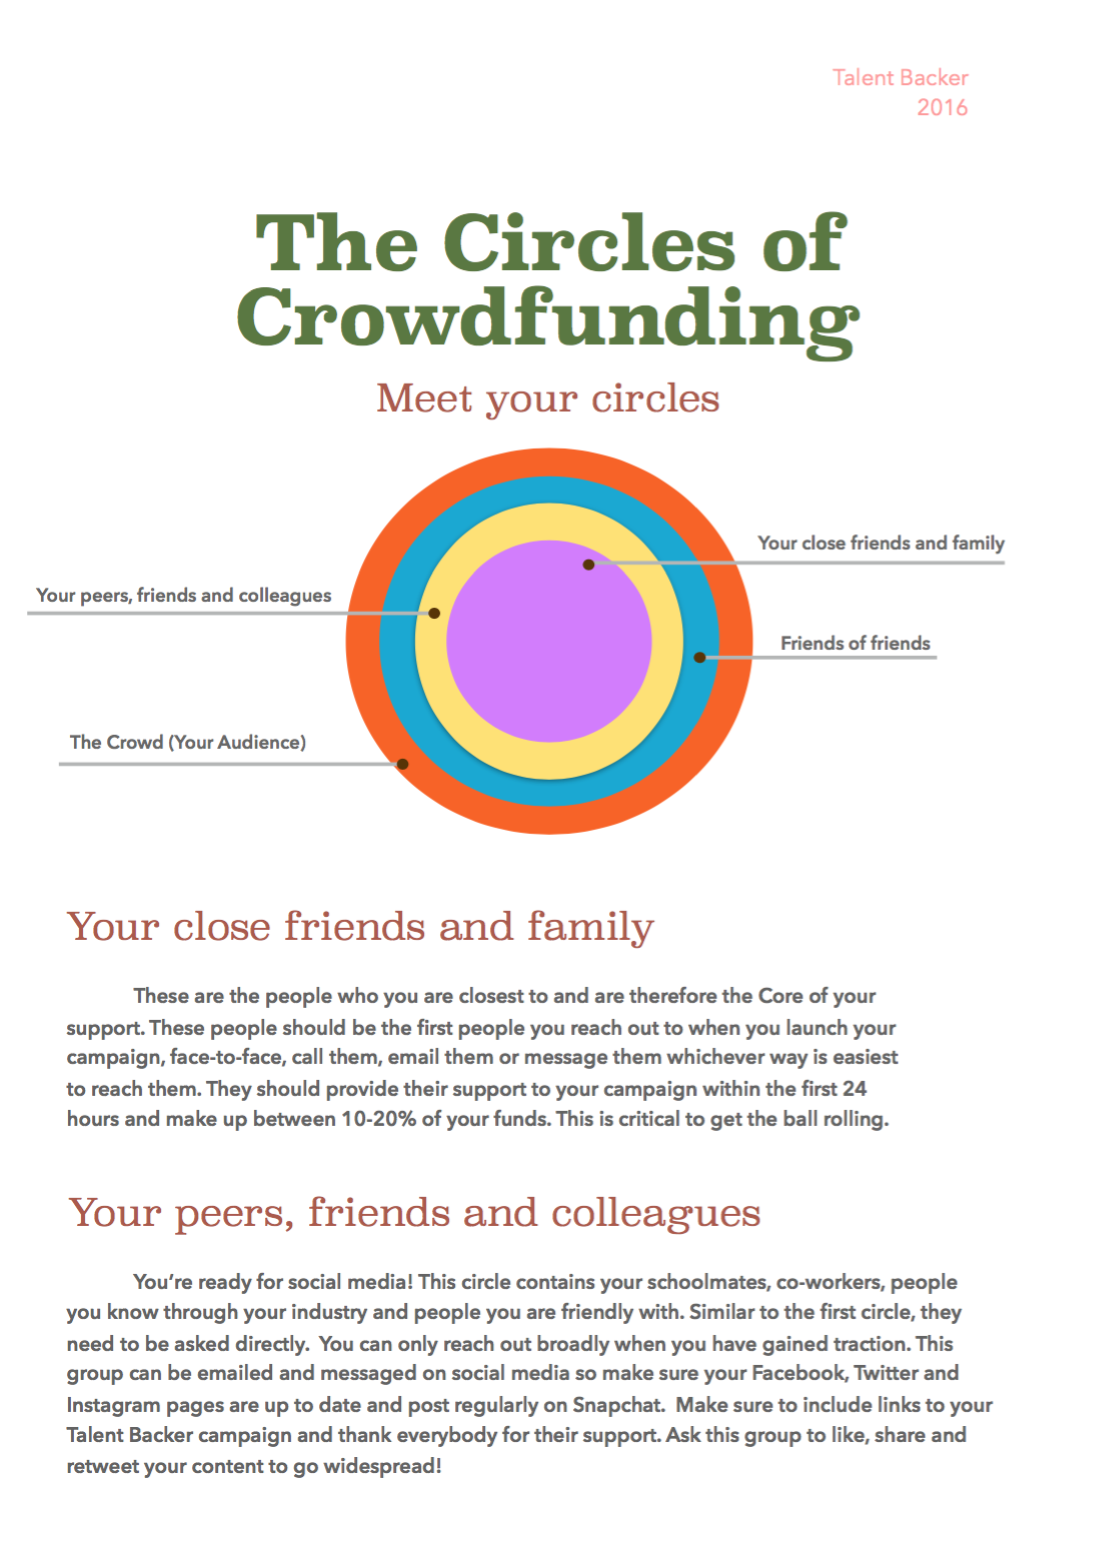 The Four Circles Of Crowdfunding